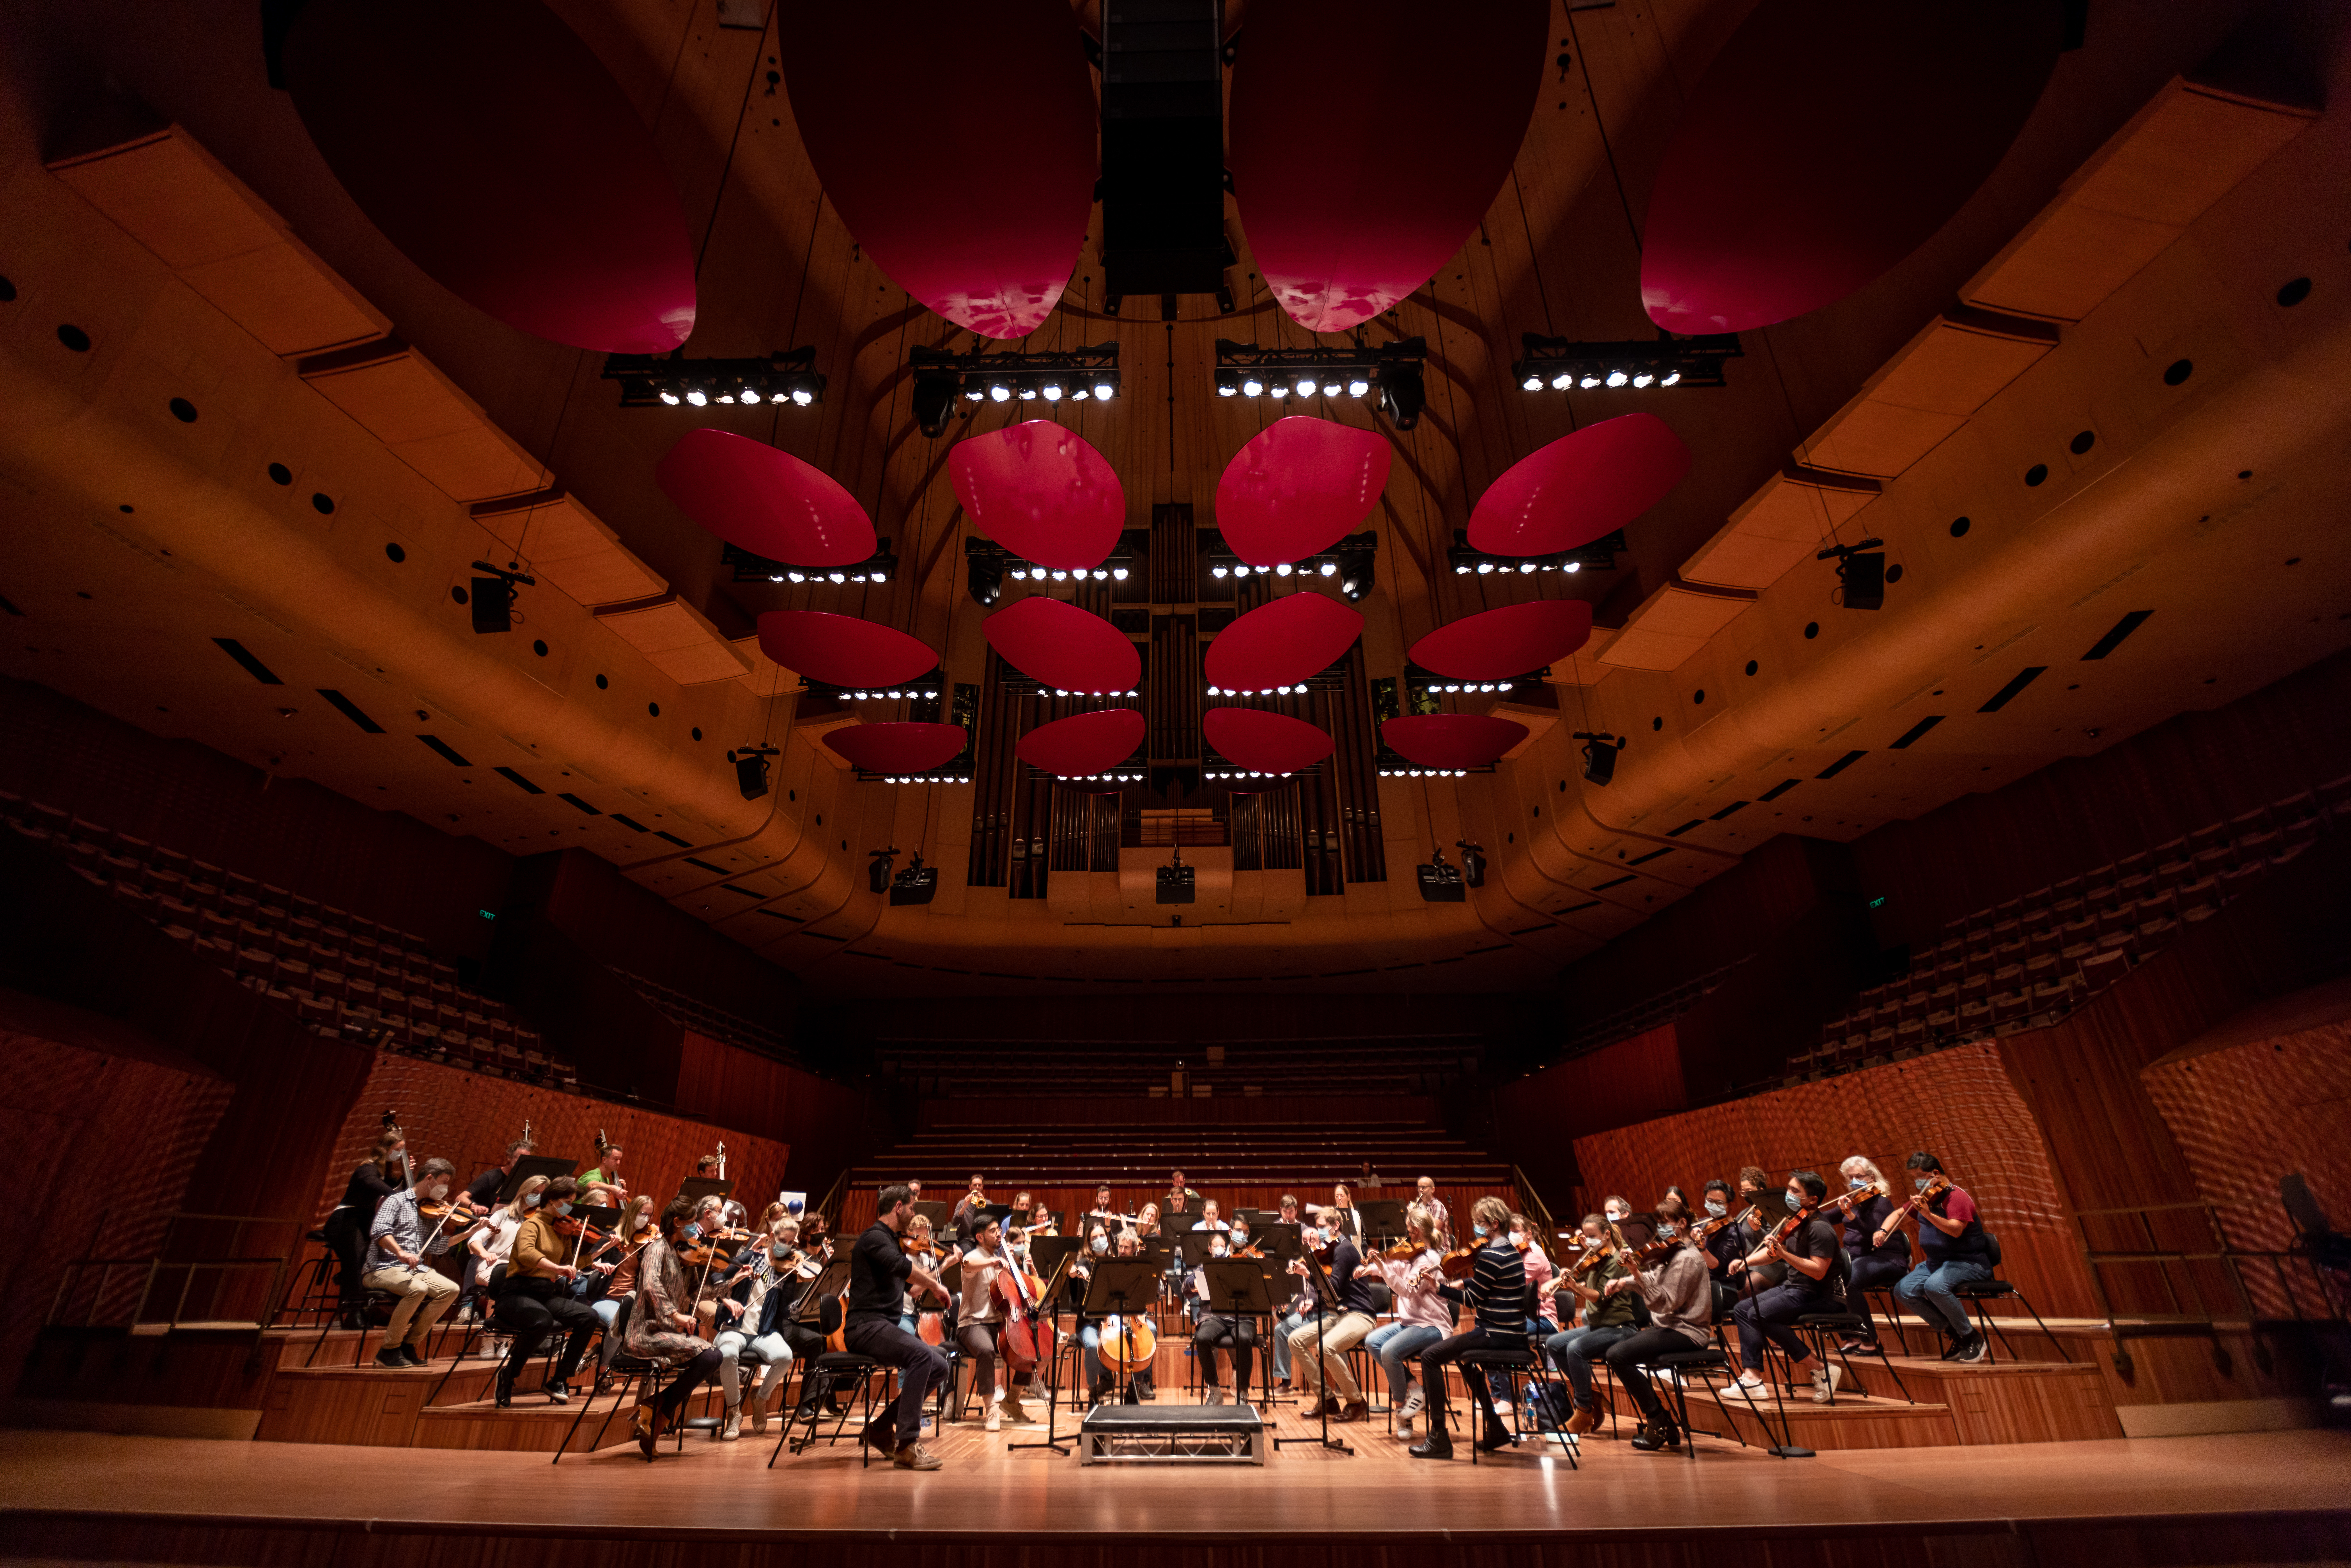 An Orchestra on the Concert Hall stage.